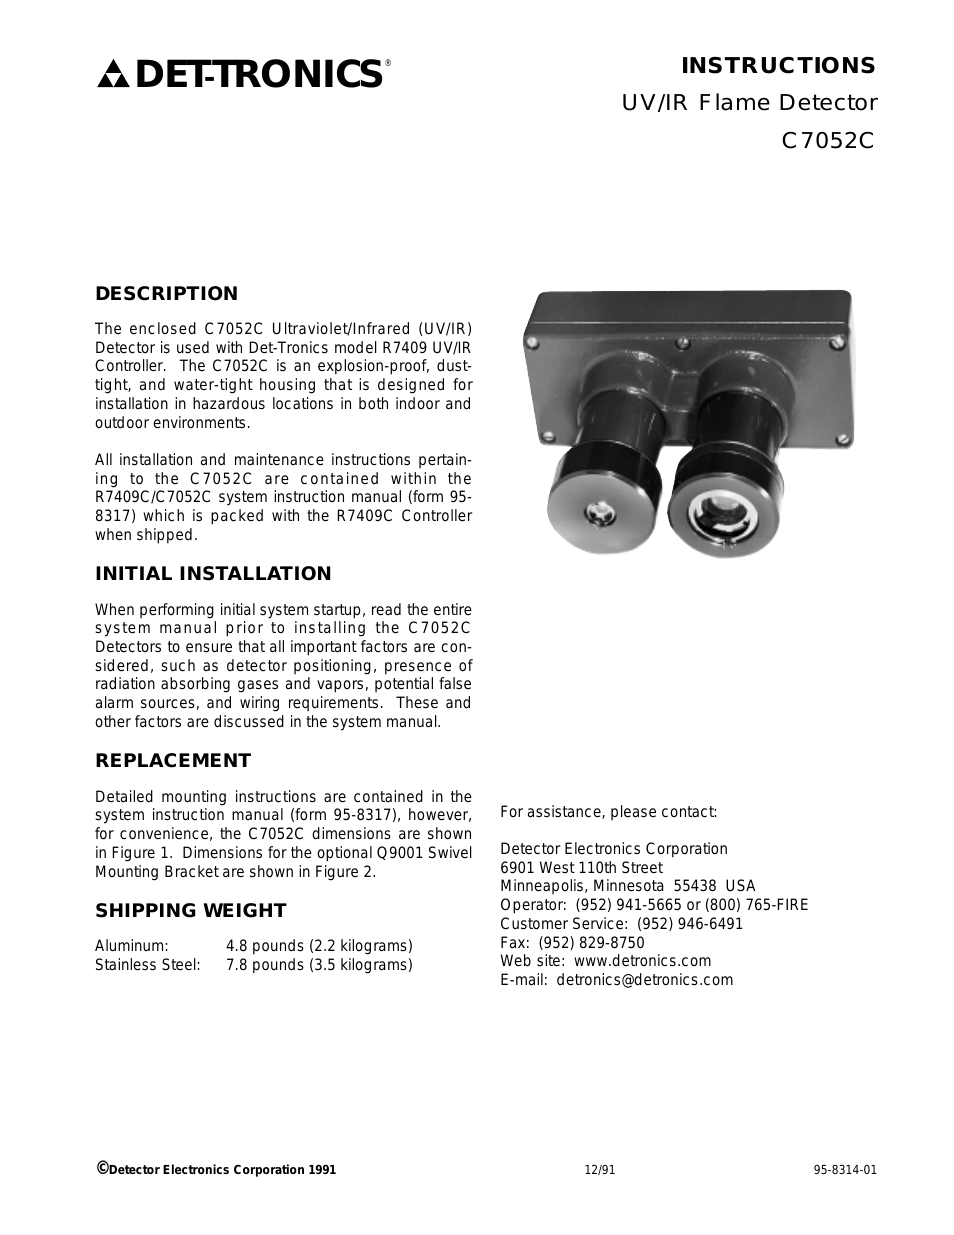 C7052C UV/IR Flame Detector used with R7409 Controller